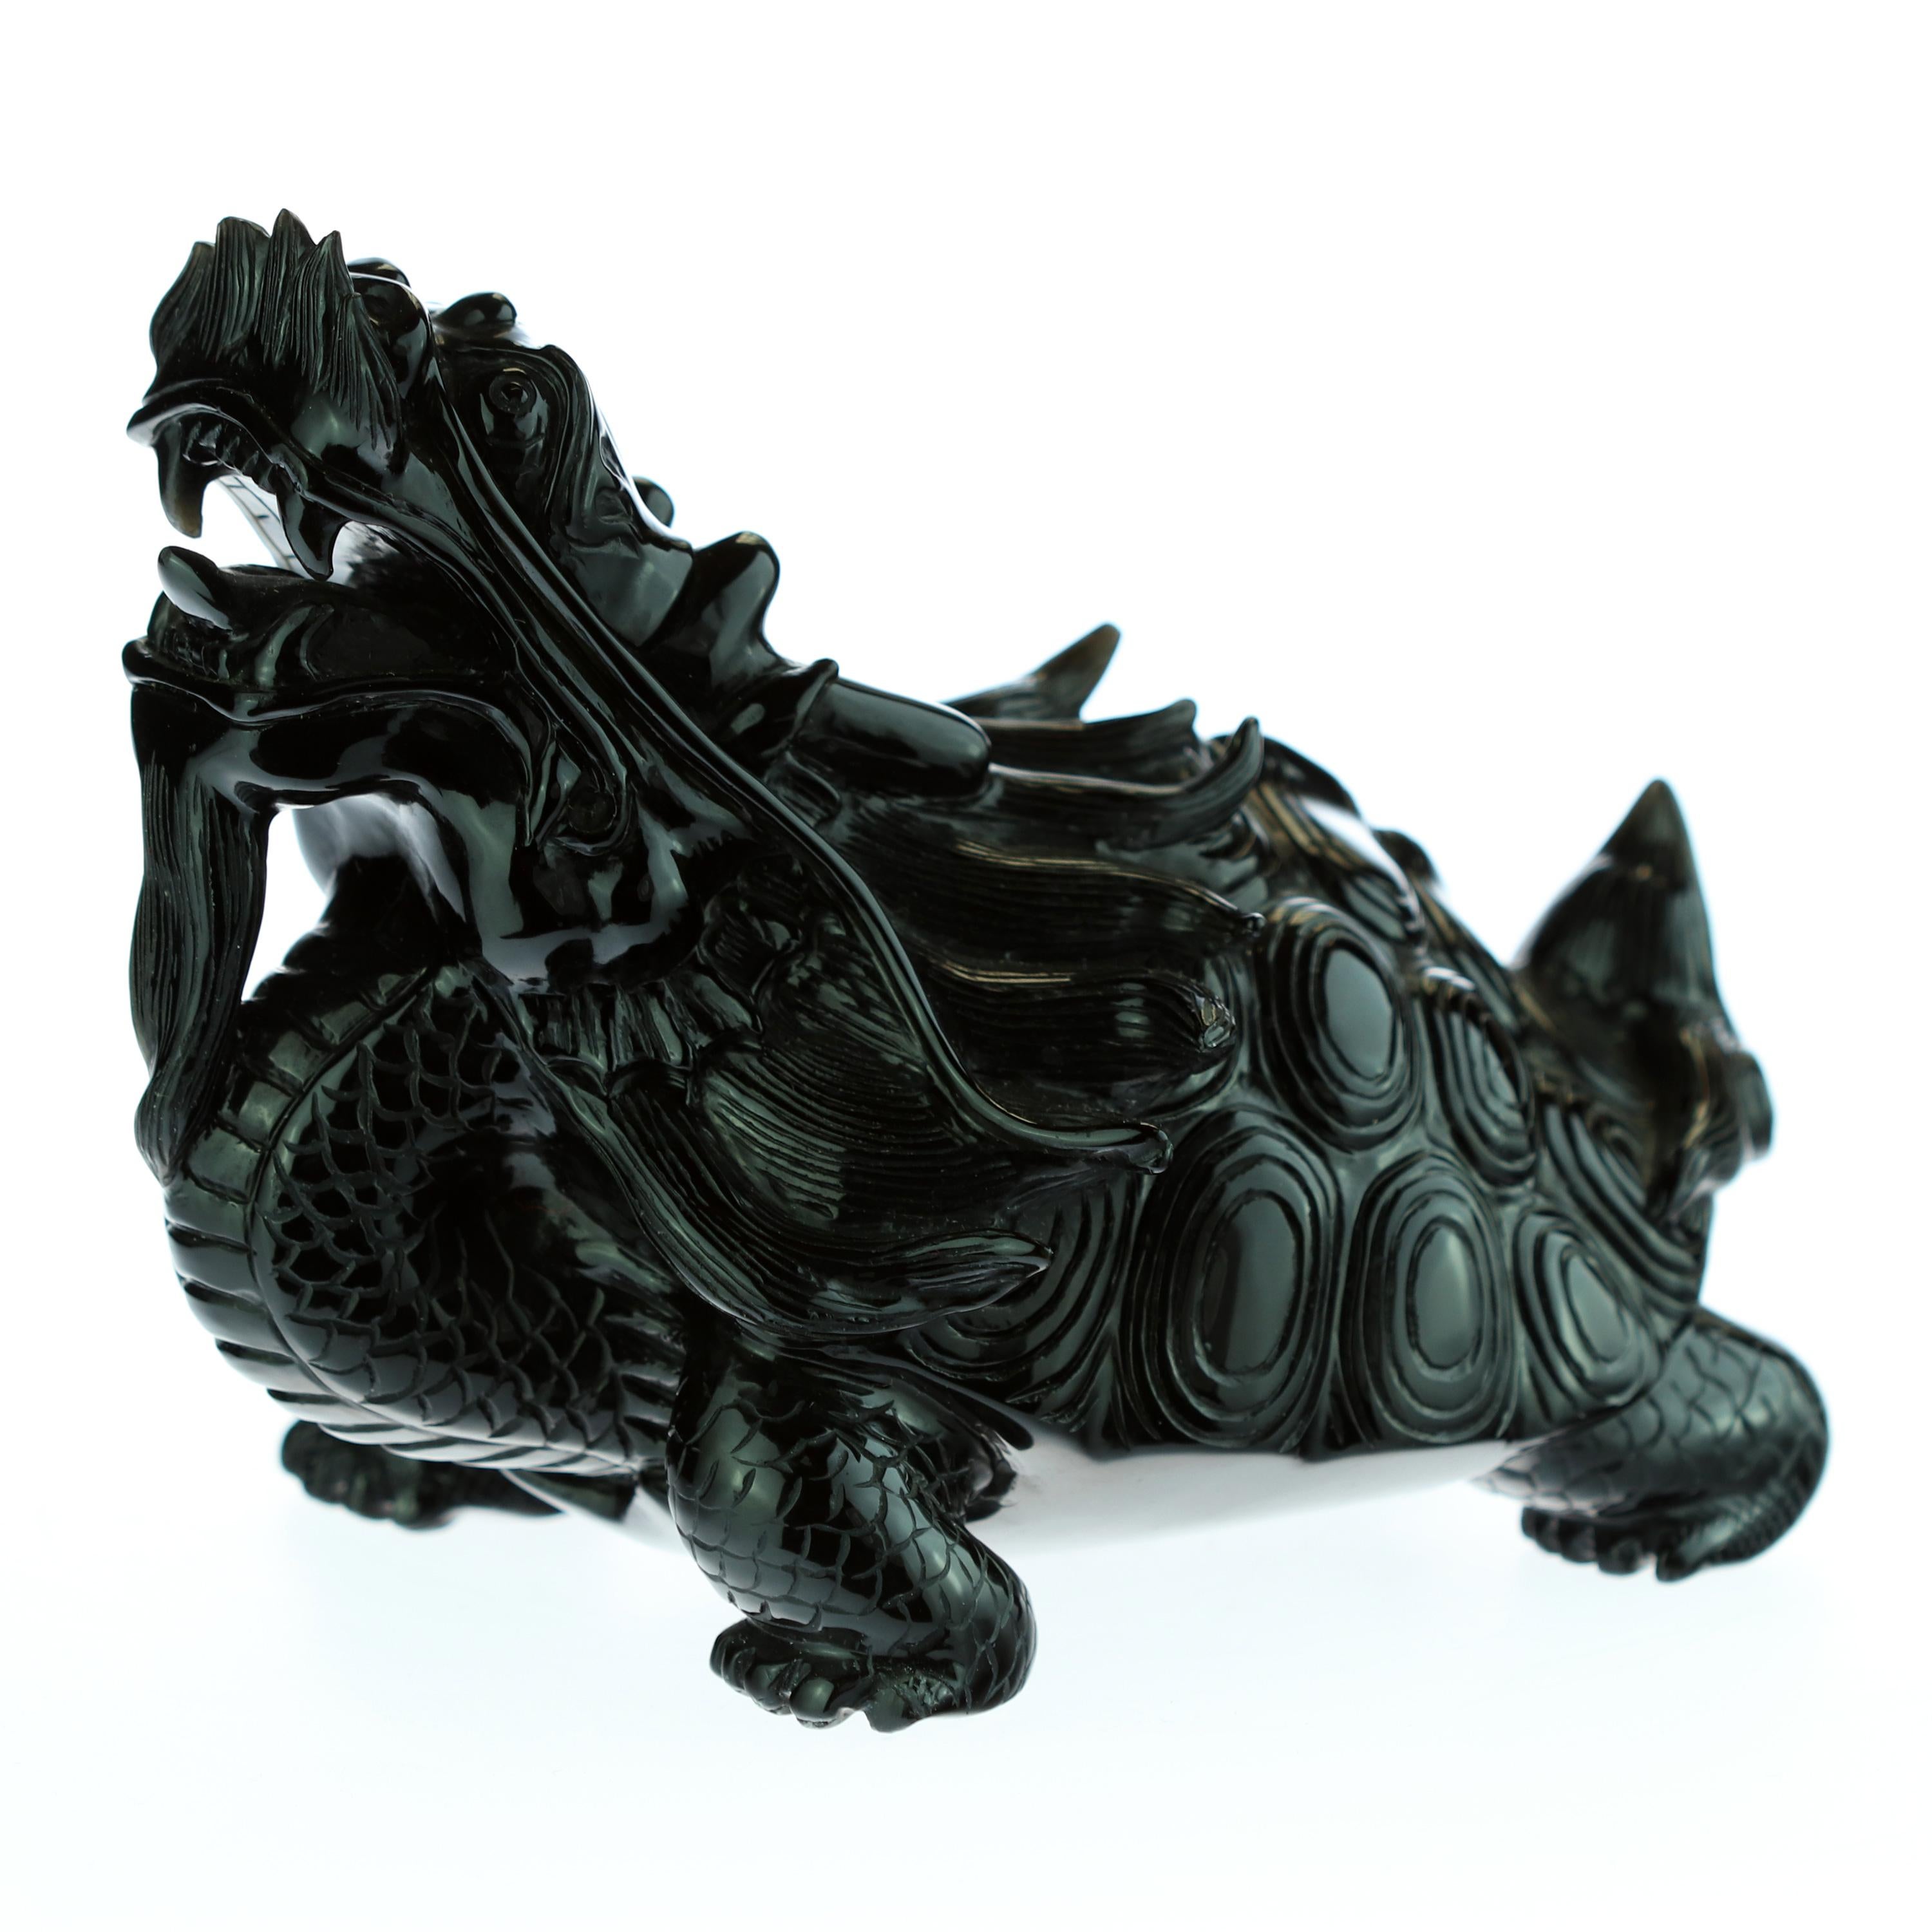 A marvelous mythological sculpture in obsidian. Chinese art, a turtle dragon creature that combines two of the four celestial animals. It had the body of a turtle and a dragon head. It symbolized courage, determination, fertility, longevity, power,